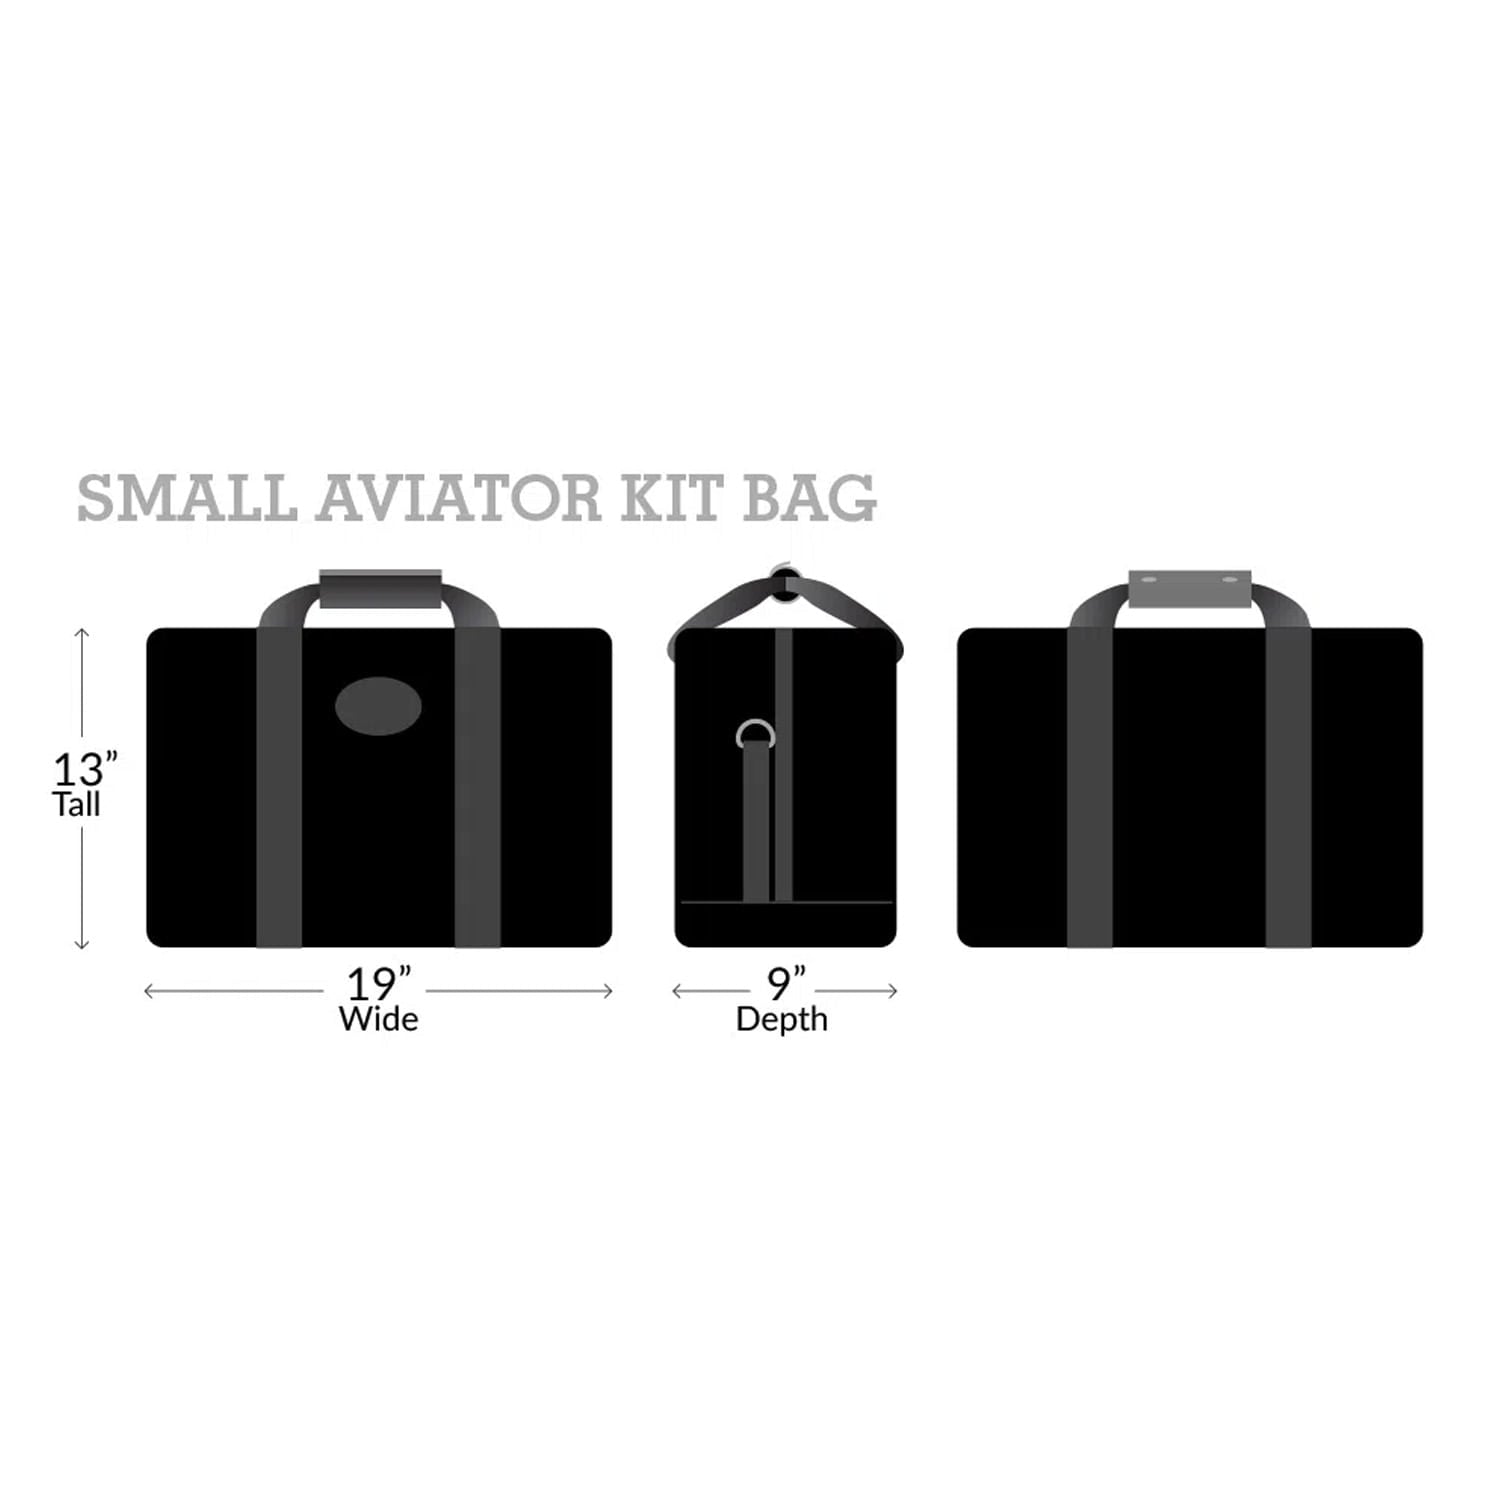 Small aviator kit bag dimensions 13 inches tall x 19 inches wide x 9 inches depth. 